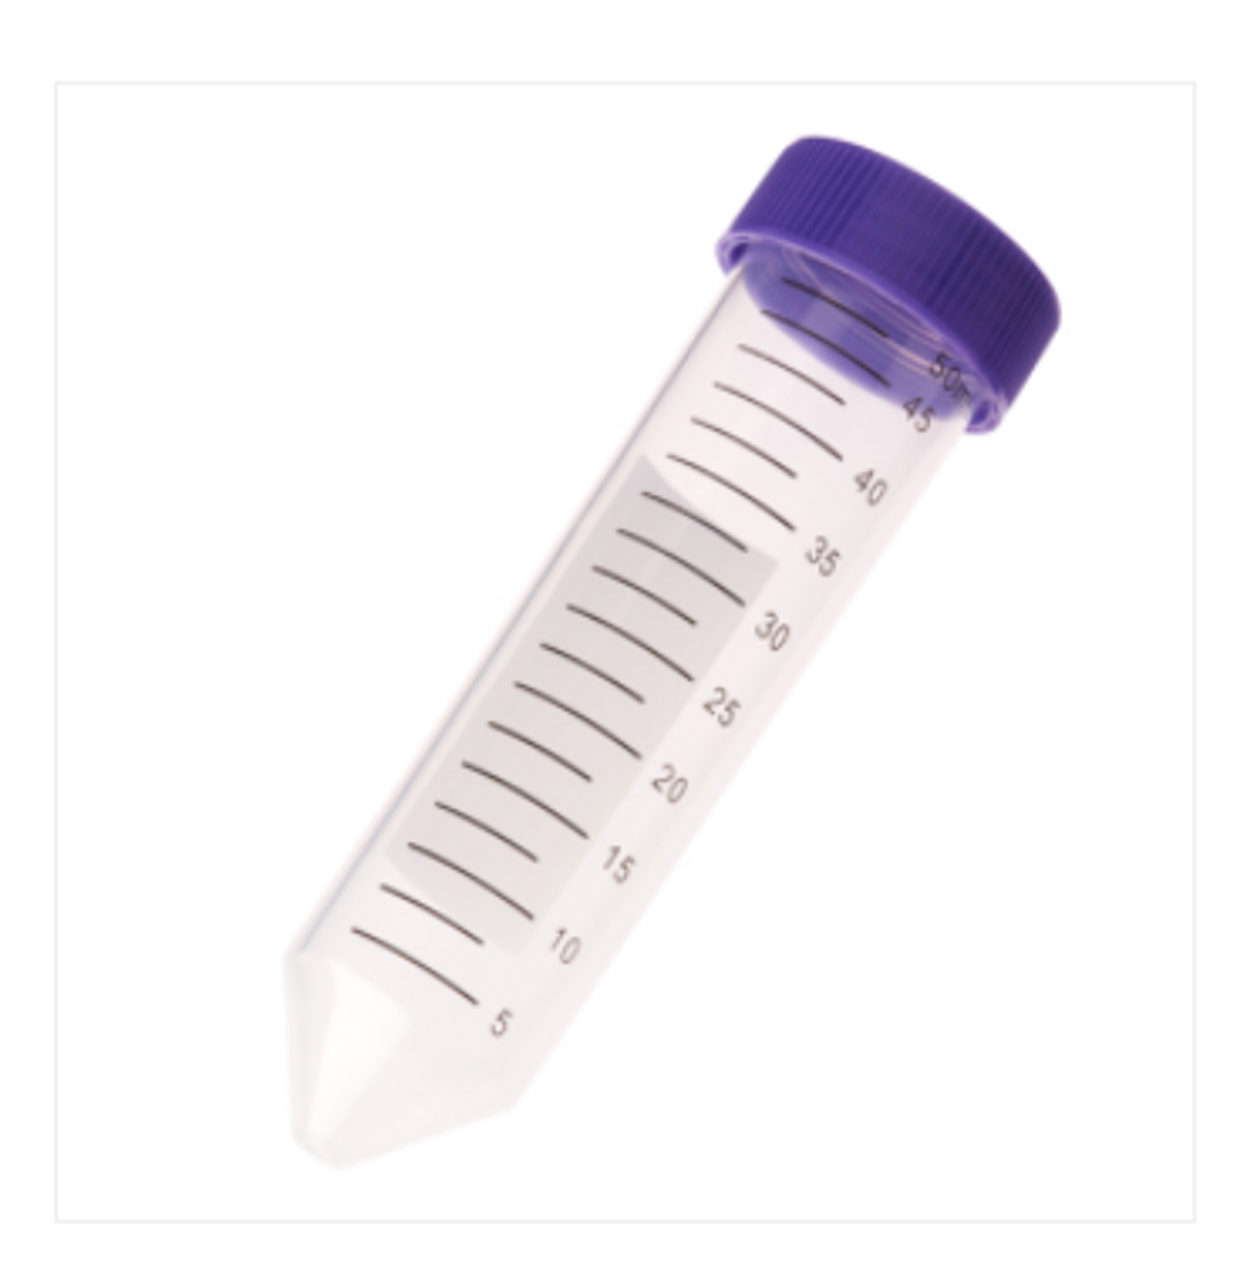 https://cdn11.bigcommerce.com/s-w9bdixgj/images/stencil/1280x1280/products/3873/8754/Celltreat_Brand_50mL_Sterile_Conical_Centrifuge_Tubes_in_Bags_with_Purple_Caps_RNase_and_DNase_free_-_Lab_Supplies_-_Stellar_Scientific__45074.1612817127.png?c=2